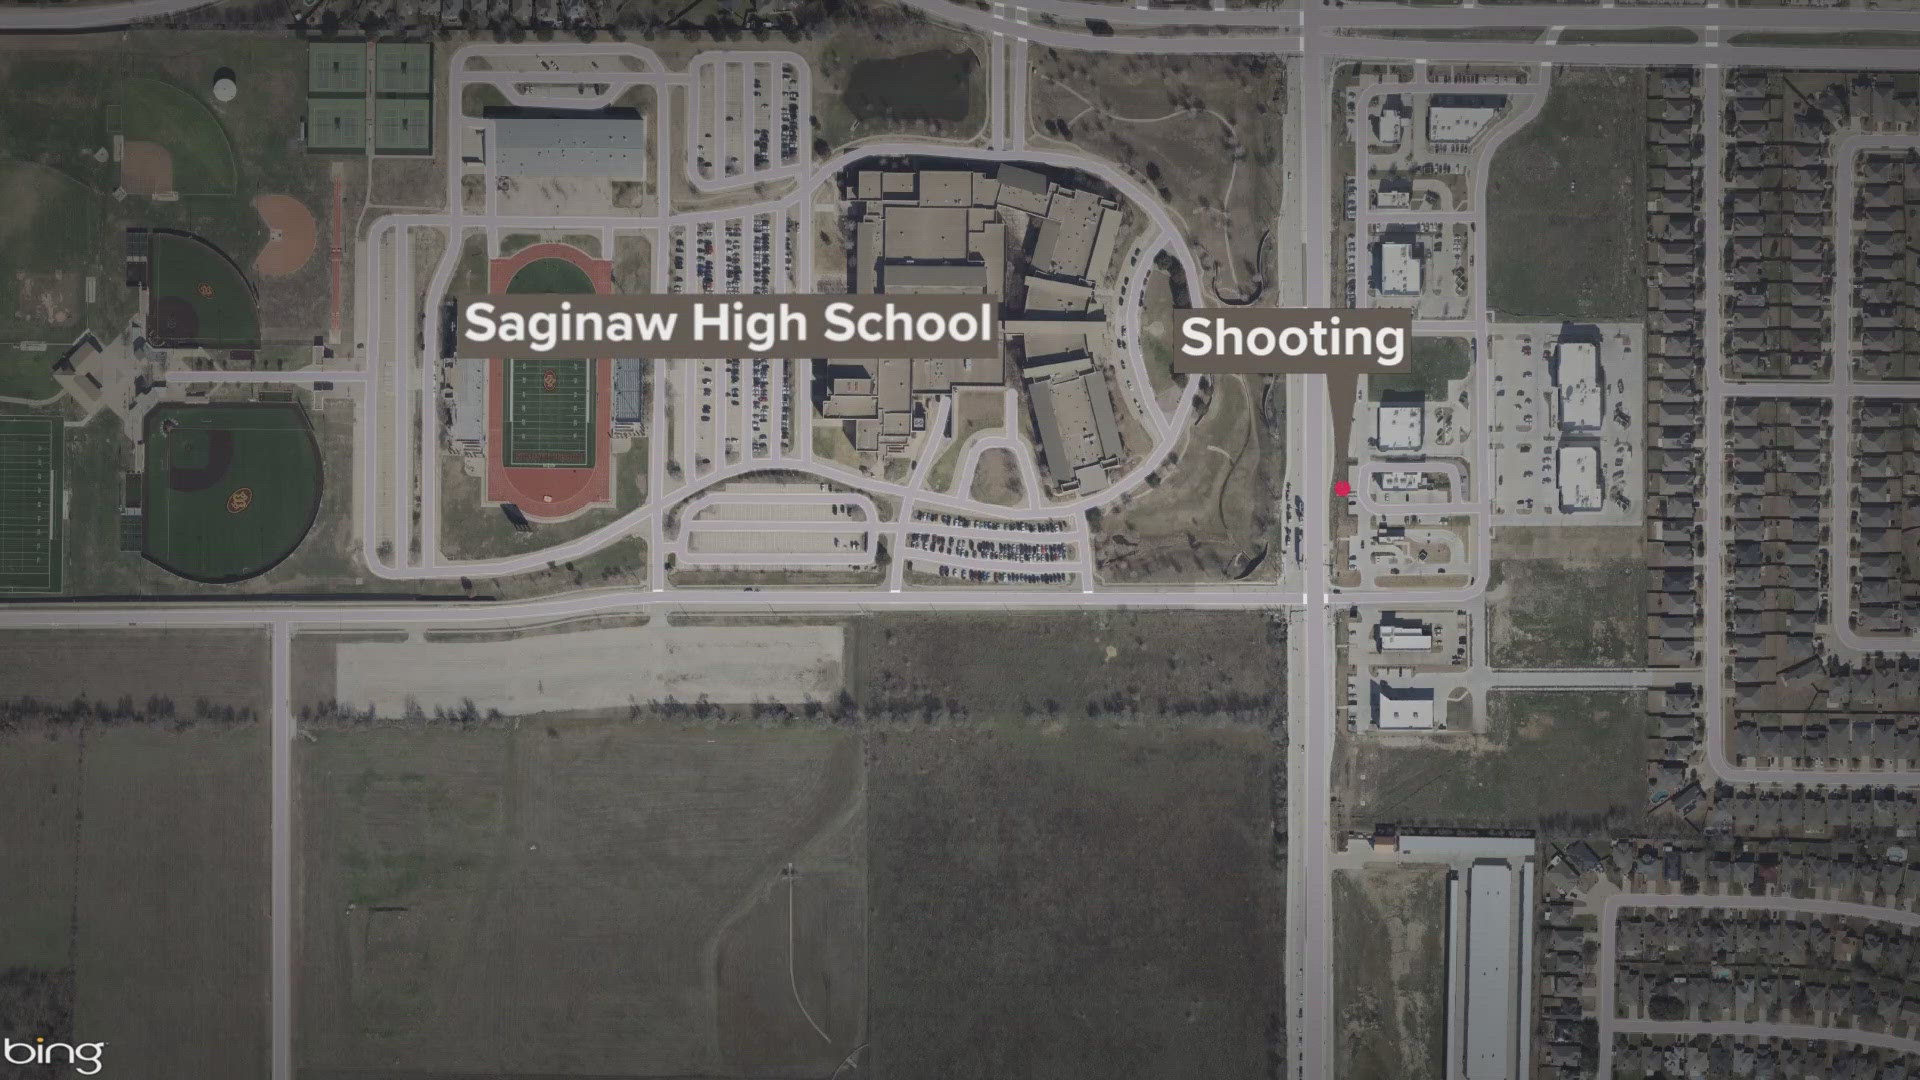 Saginaw and Fort Worth police are searching for a suspect in the shooting.